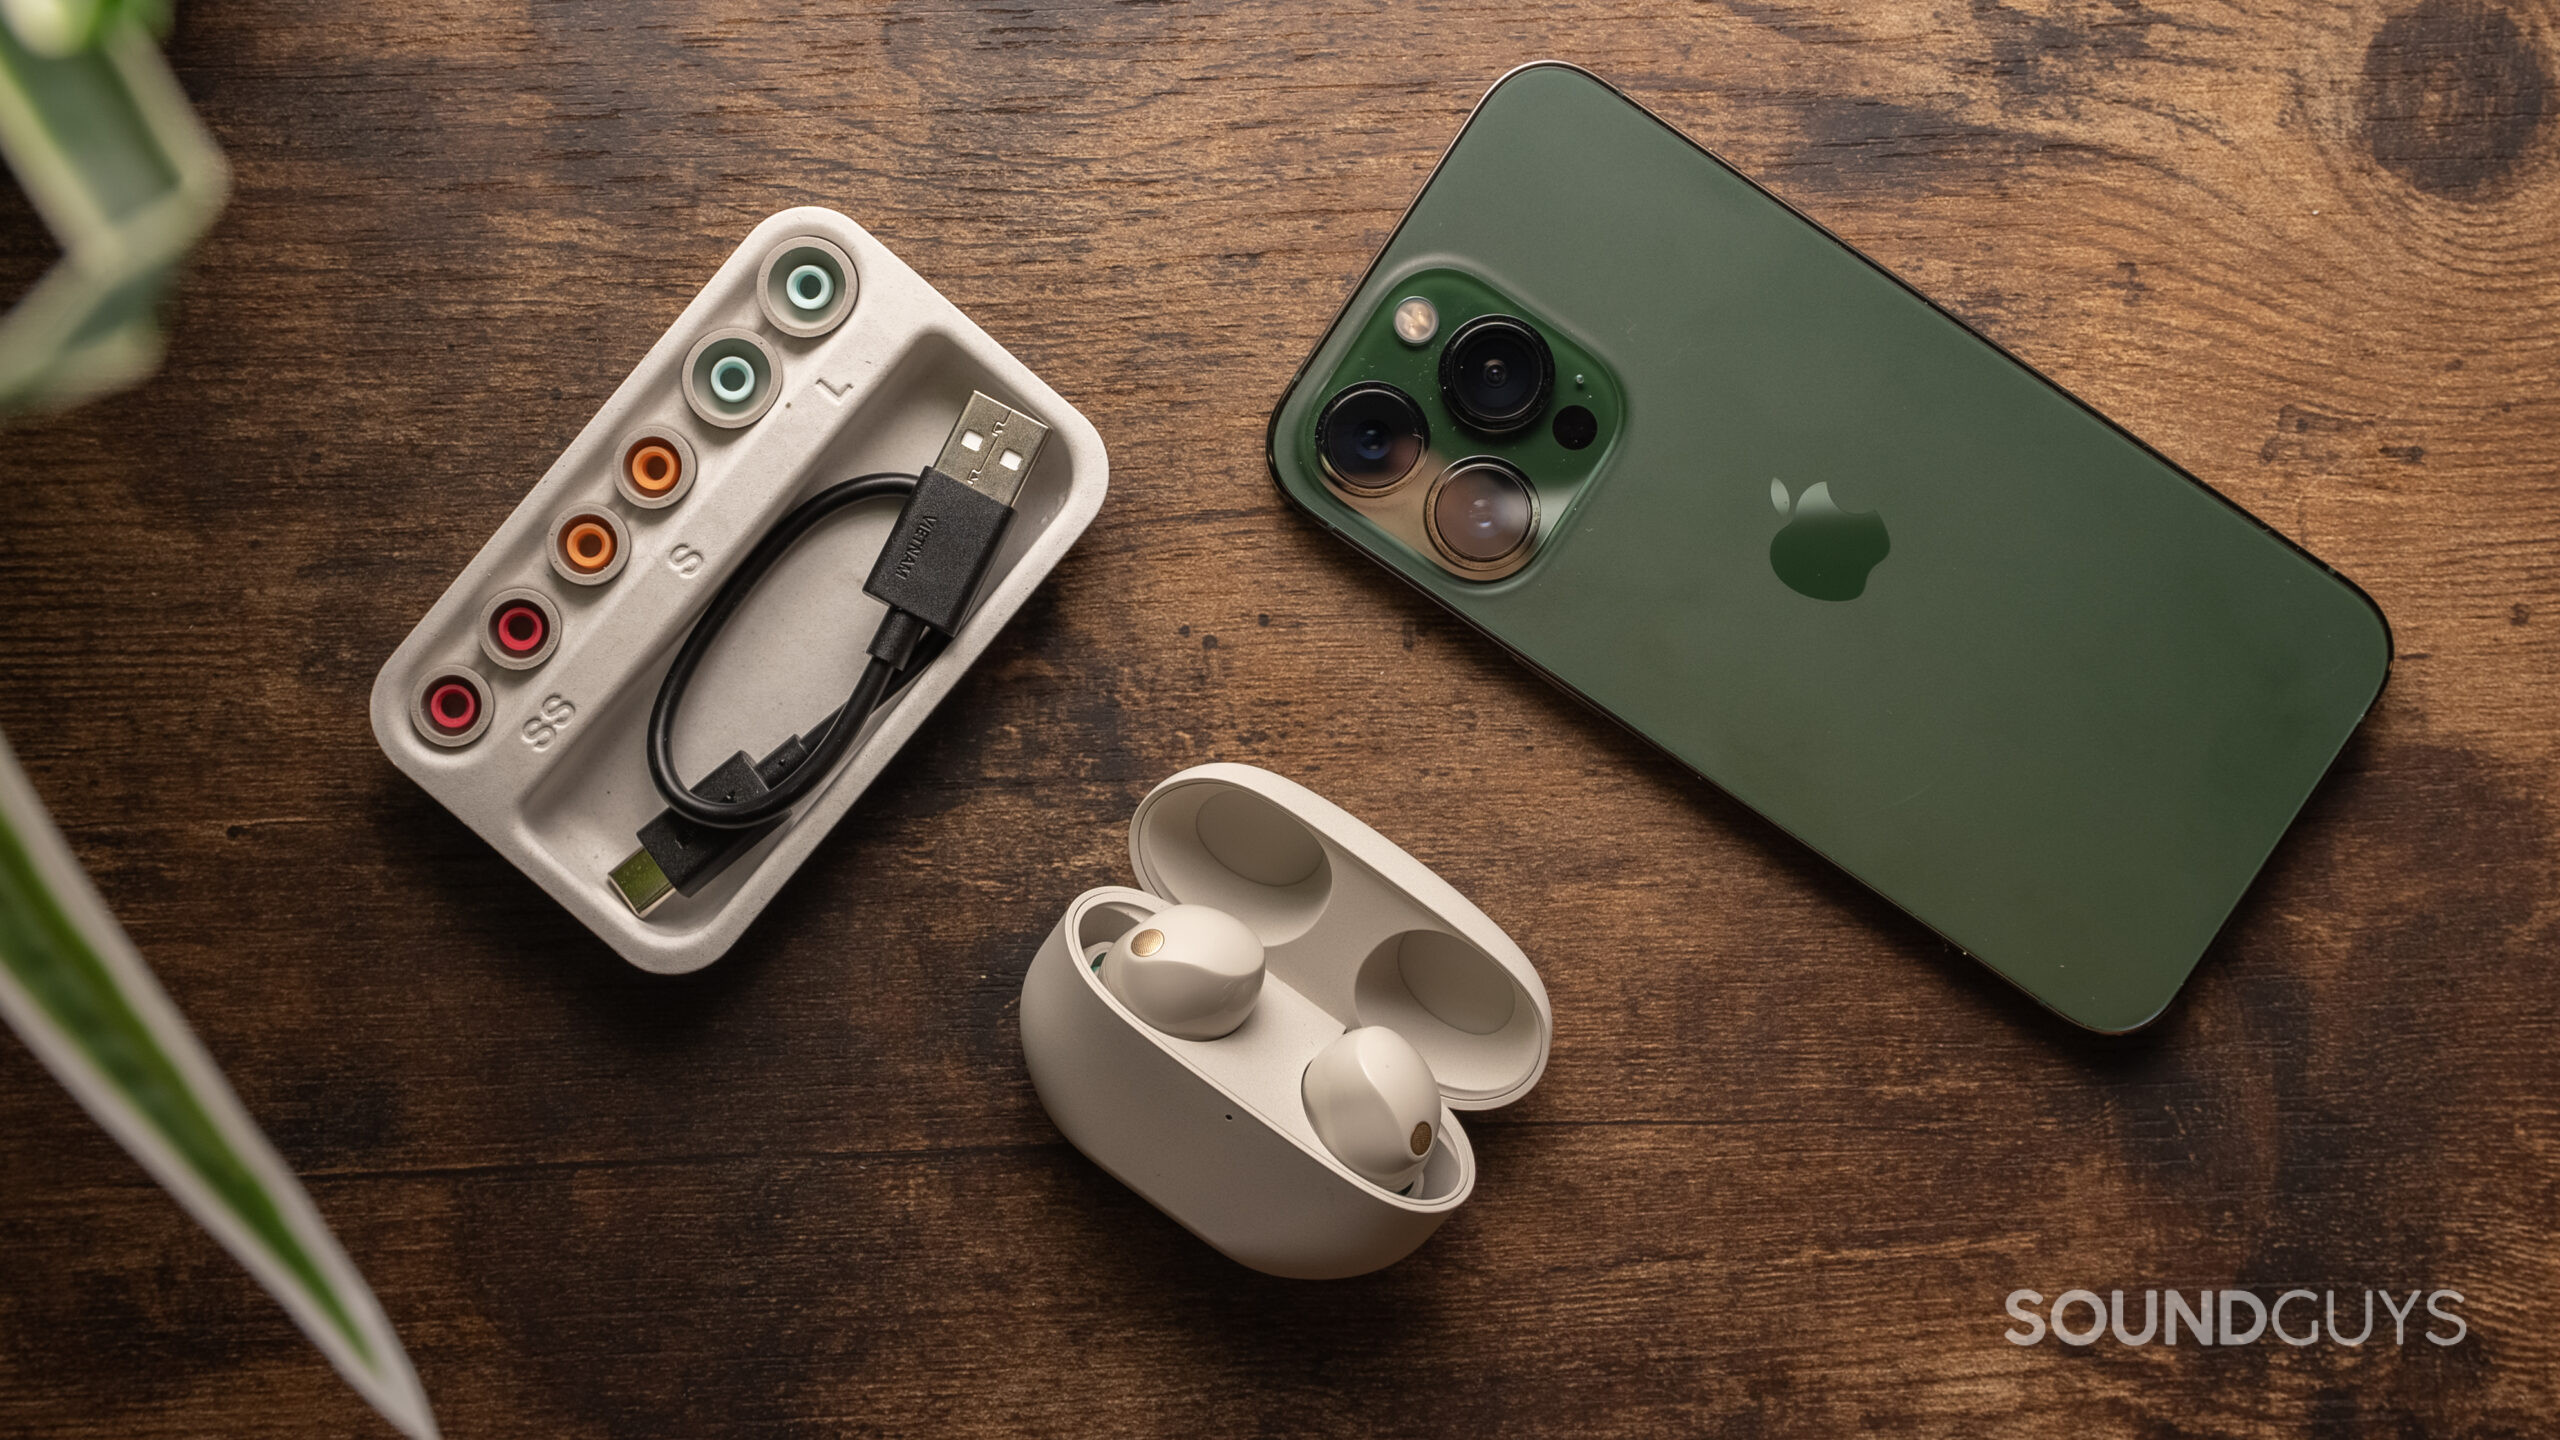 The Sony WF-1000XM5 charging case open with the earbuds inside beside a green iPhone 13 Pro and the ear tip selection and USB charging cable